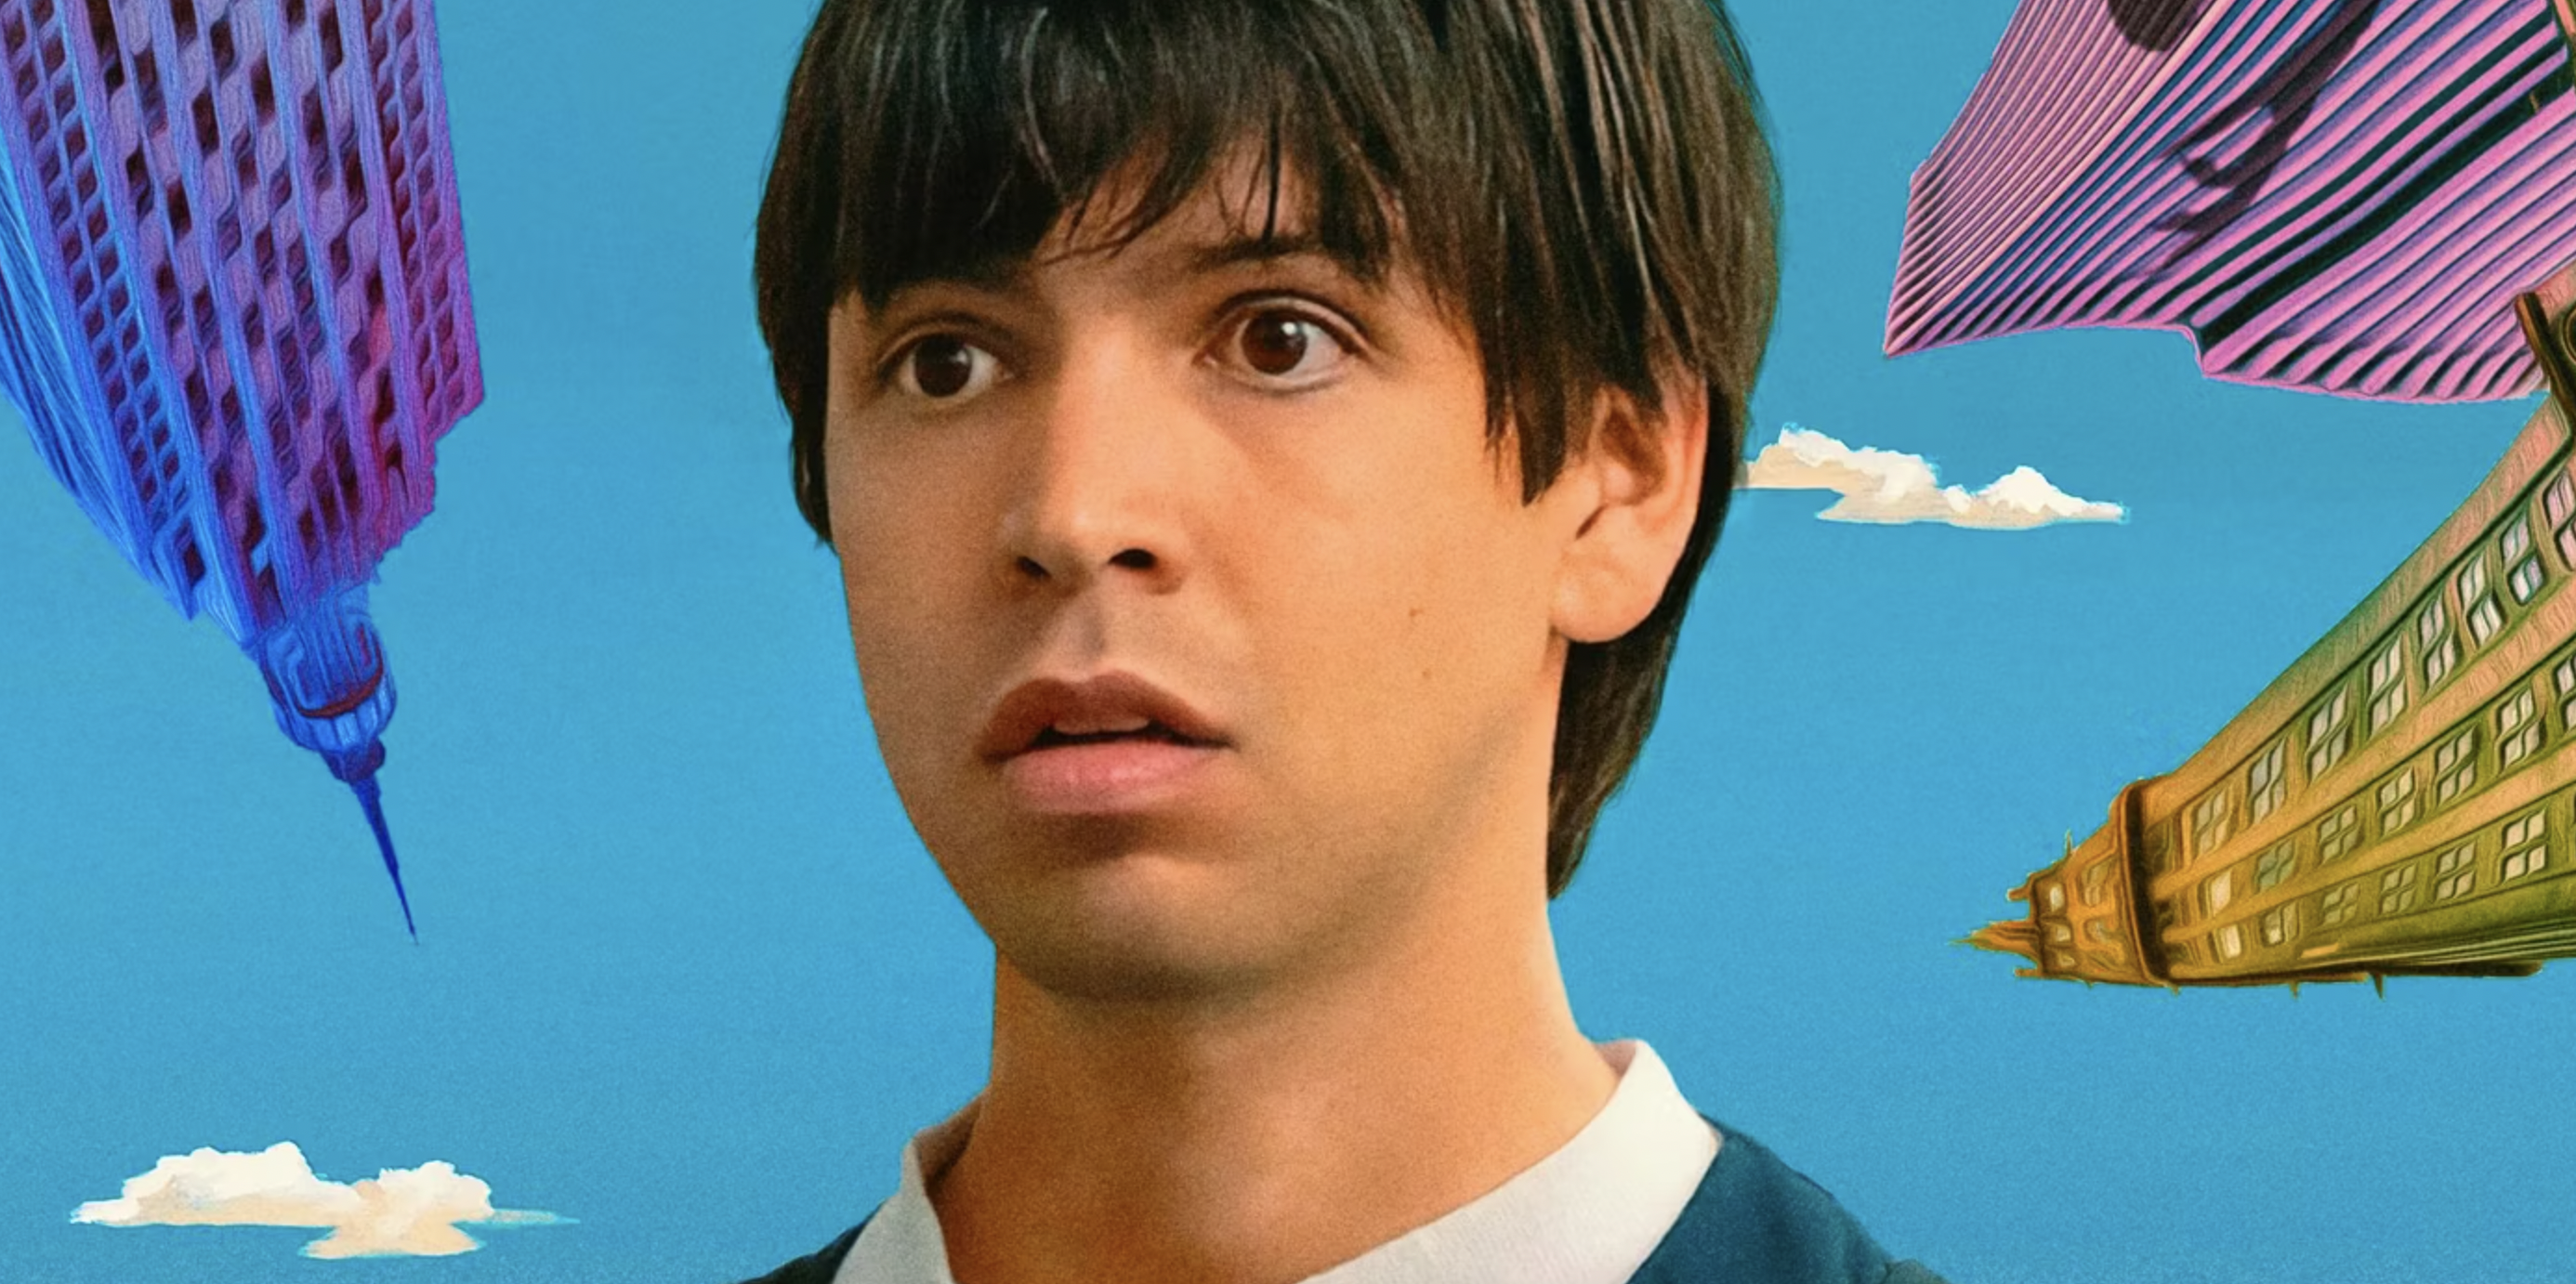 Julio Torres looks surprised in a promo image for the upcoming Problemista movie, screening in Seattle and cities around the US.